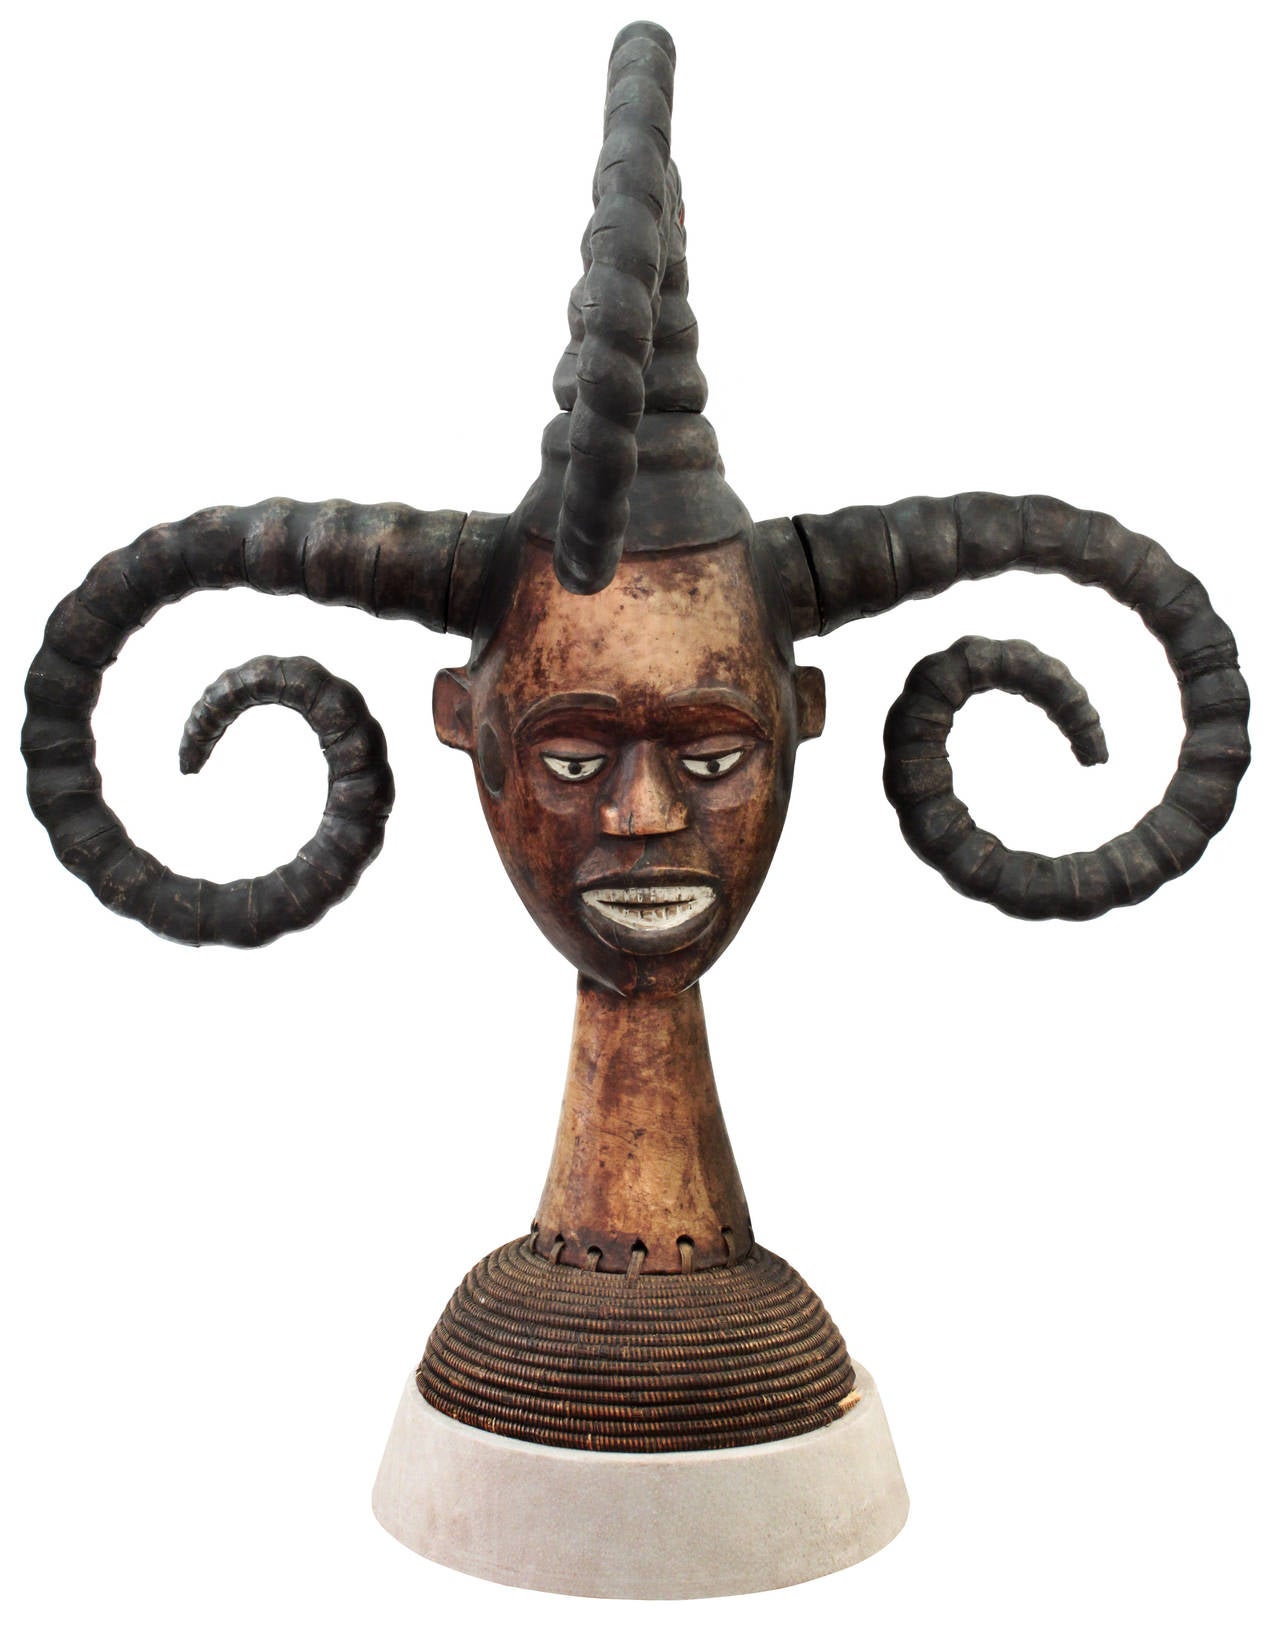 Authentic hand-carved African sculpture, woman's head with four horns, by the Ekoi tribe in Nigeria with a suede base by Karl Springer, American, 1980's
(photo of original Karl Springer tag included). The horns are representations of ethnic hair